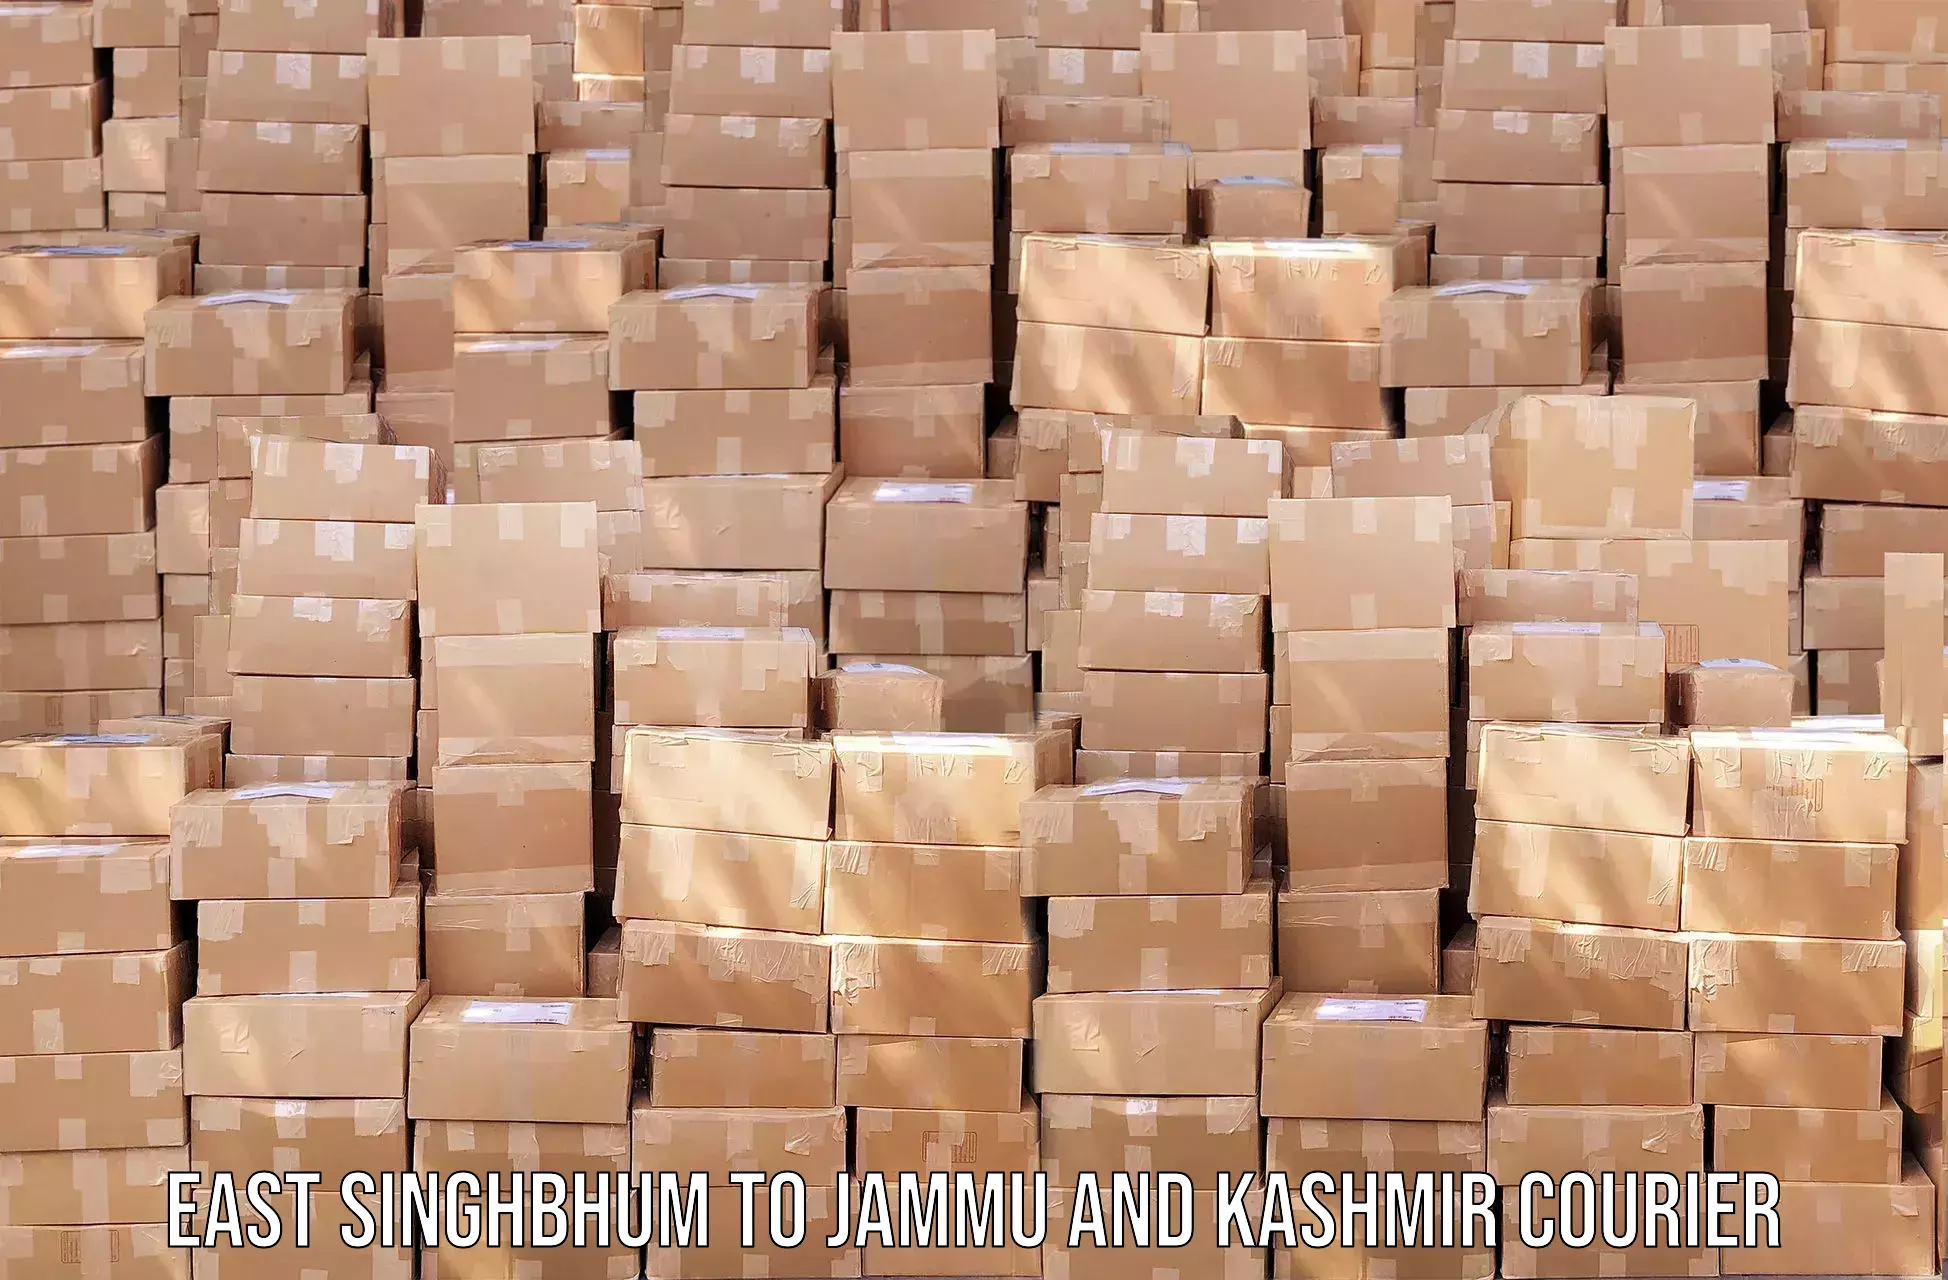 Easy access courier services East Singhbhum to Jammu